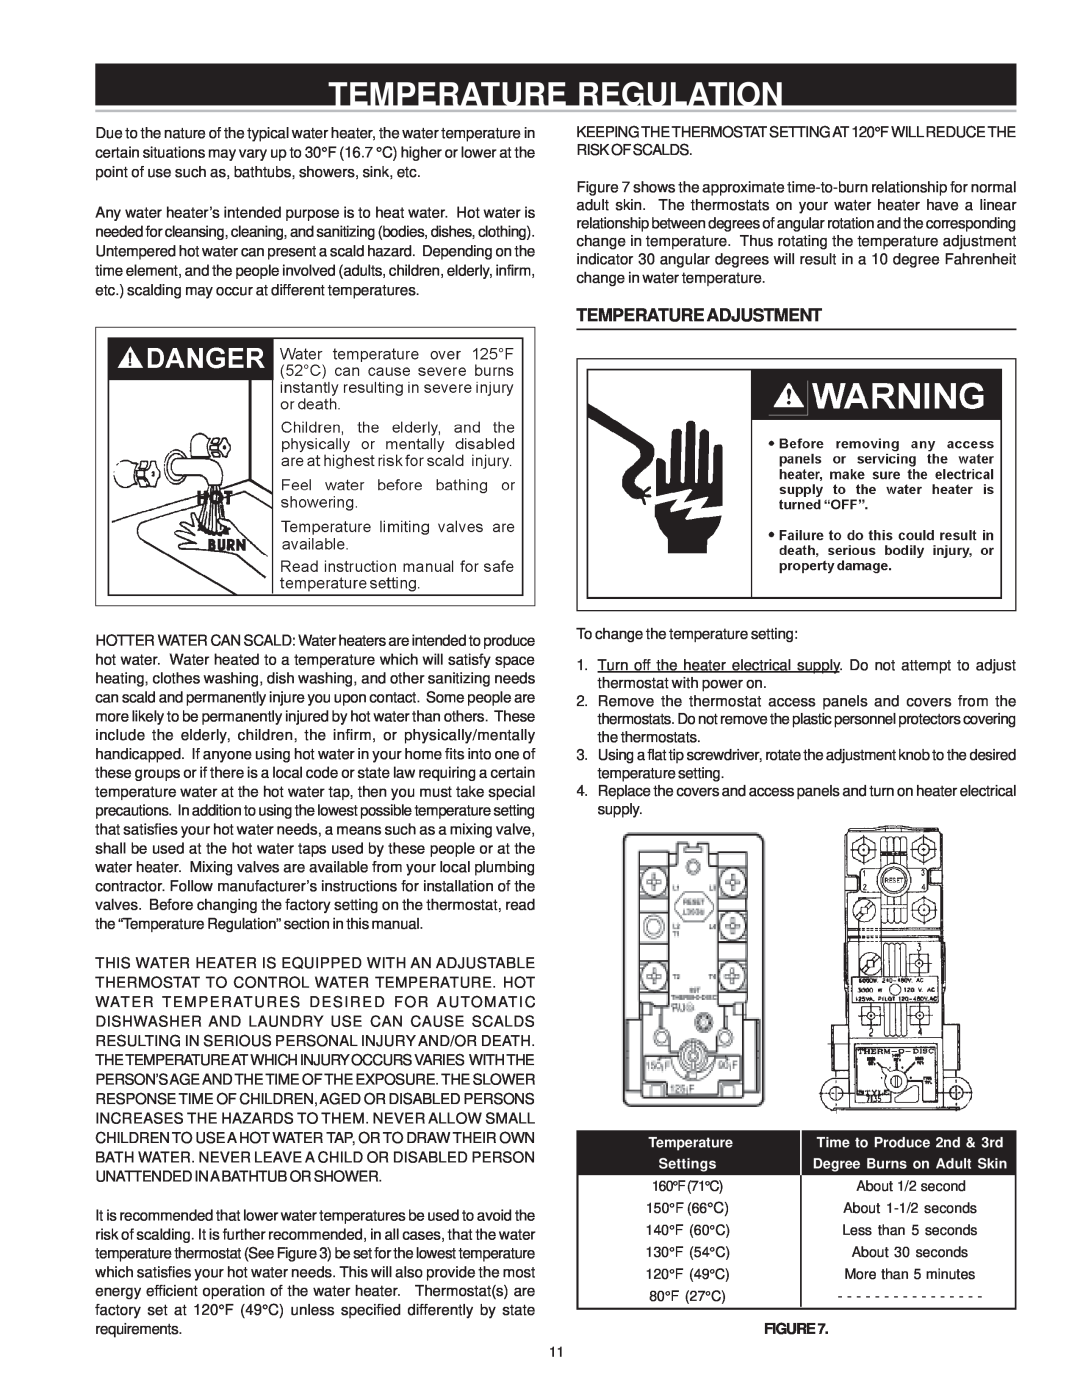 A.O. Smith WATER HEATERS instruction manual Temperature Regulation, Temperatureadjustment, Time to Produce 2nd & 3rd 